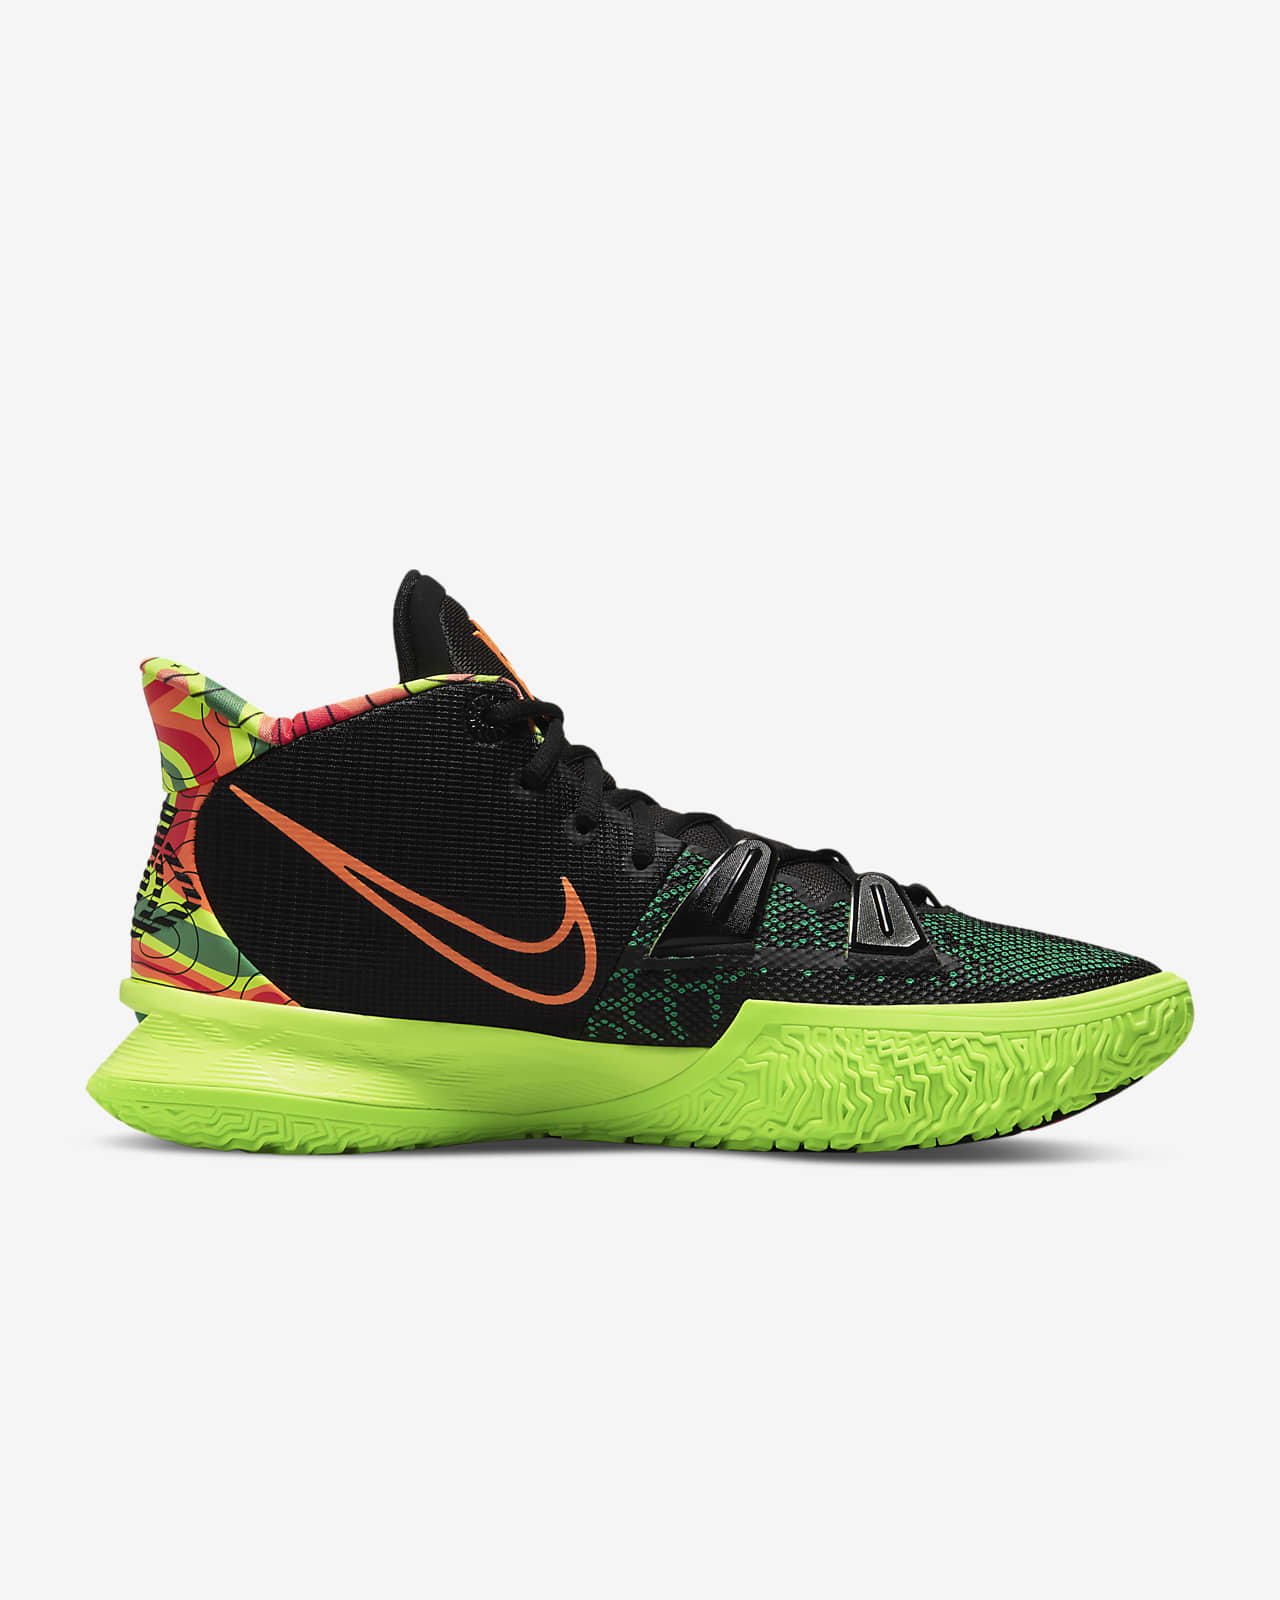 kyrie irving shoes size 7